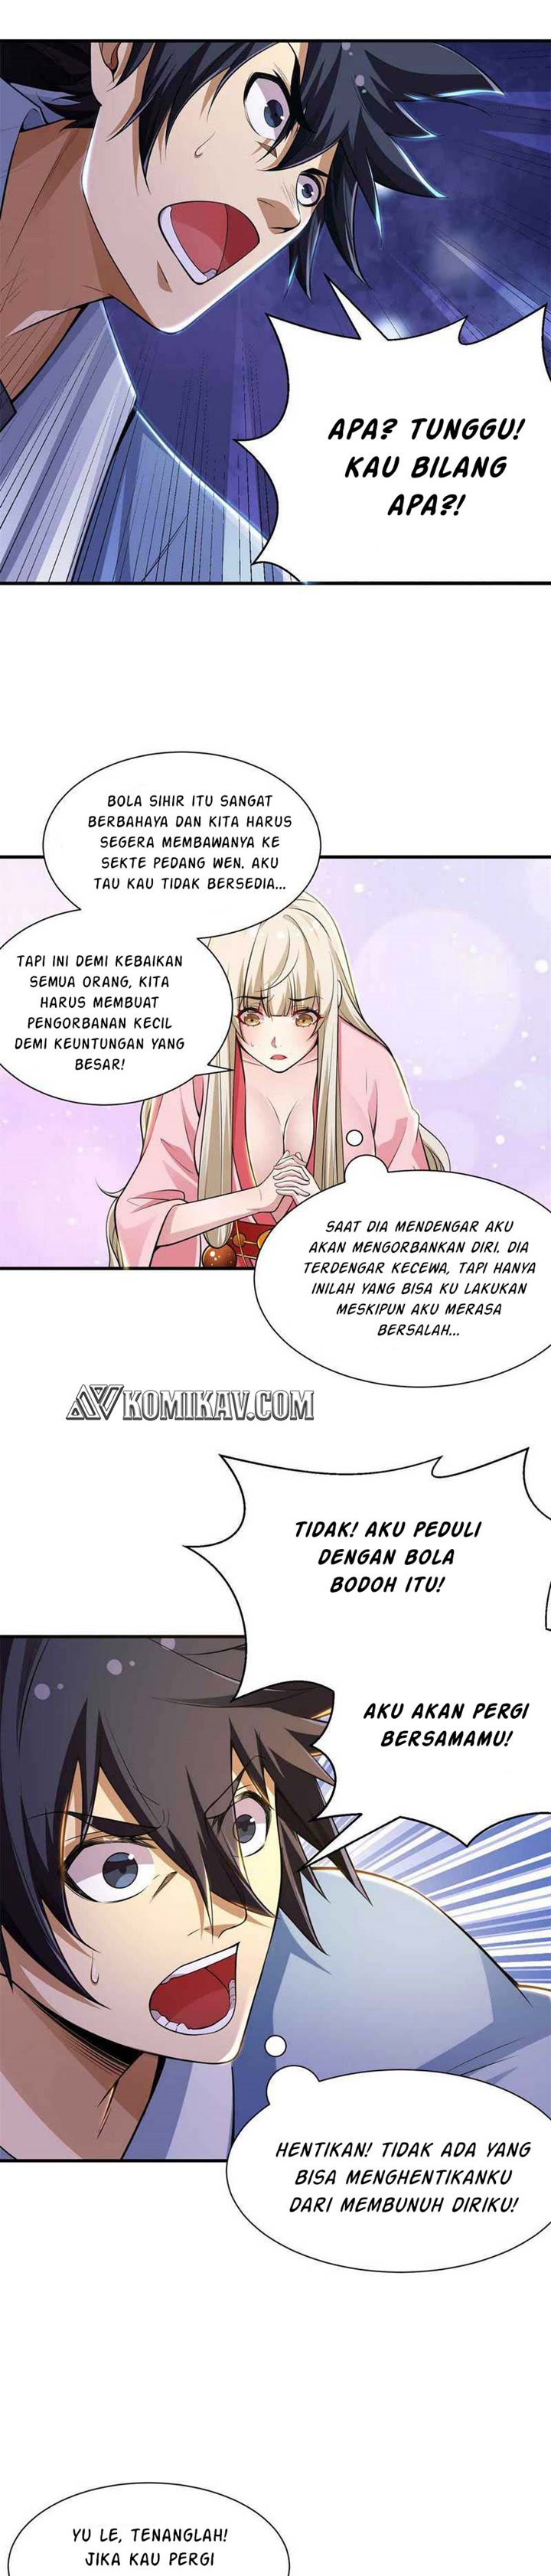 Dilarang COPAS - situs resmi www.mangacanblog.com - Komik i just want to be beaten to death by everyone 021 - chapter 21 22 Indonesia i just want to be beaten to death by everyone 021 - chapter 21 Terbaru 7|Baca Manga Komik Indonesia|Mangacan